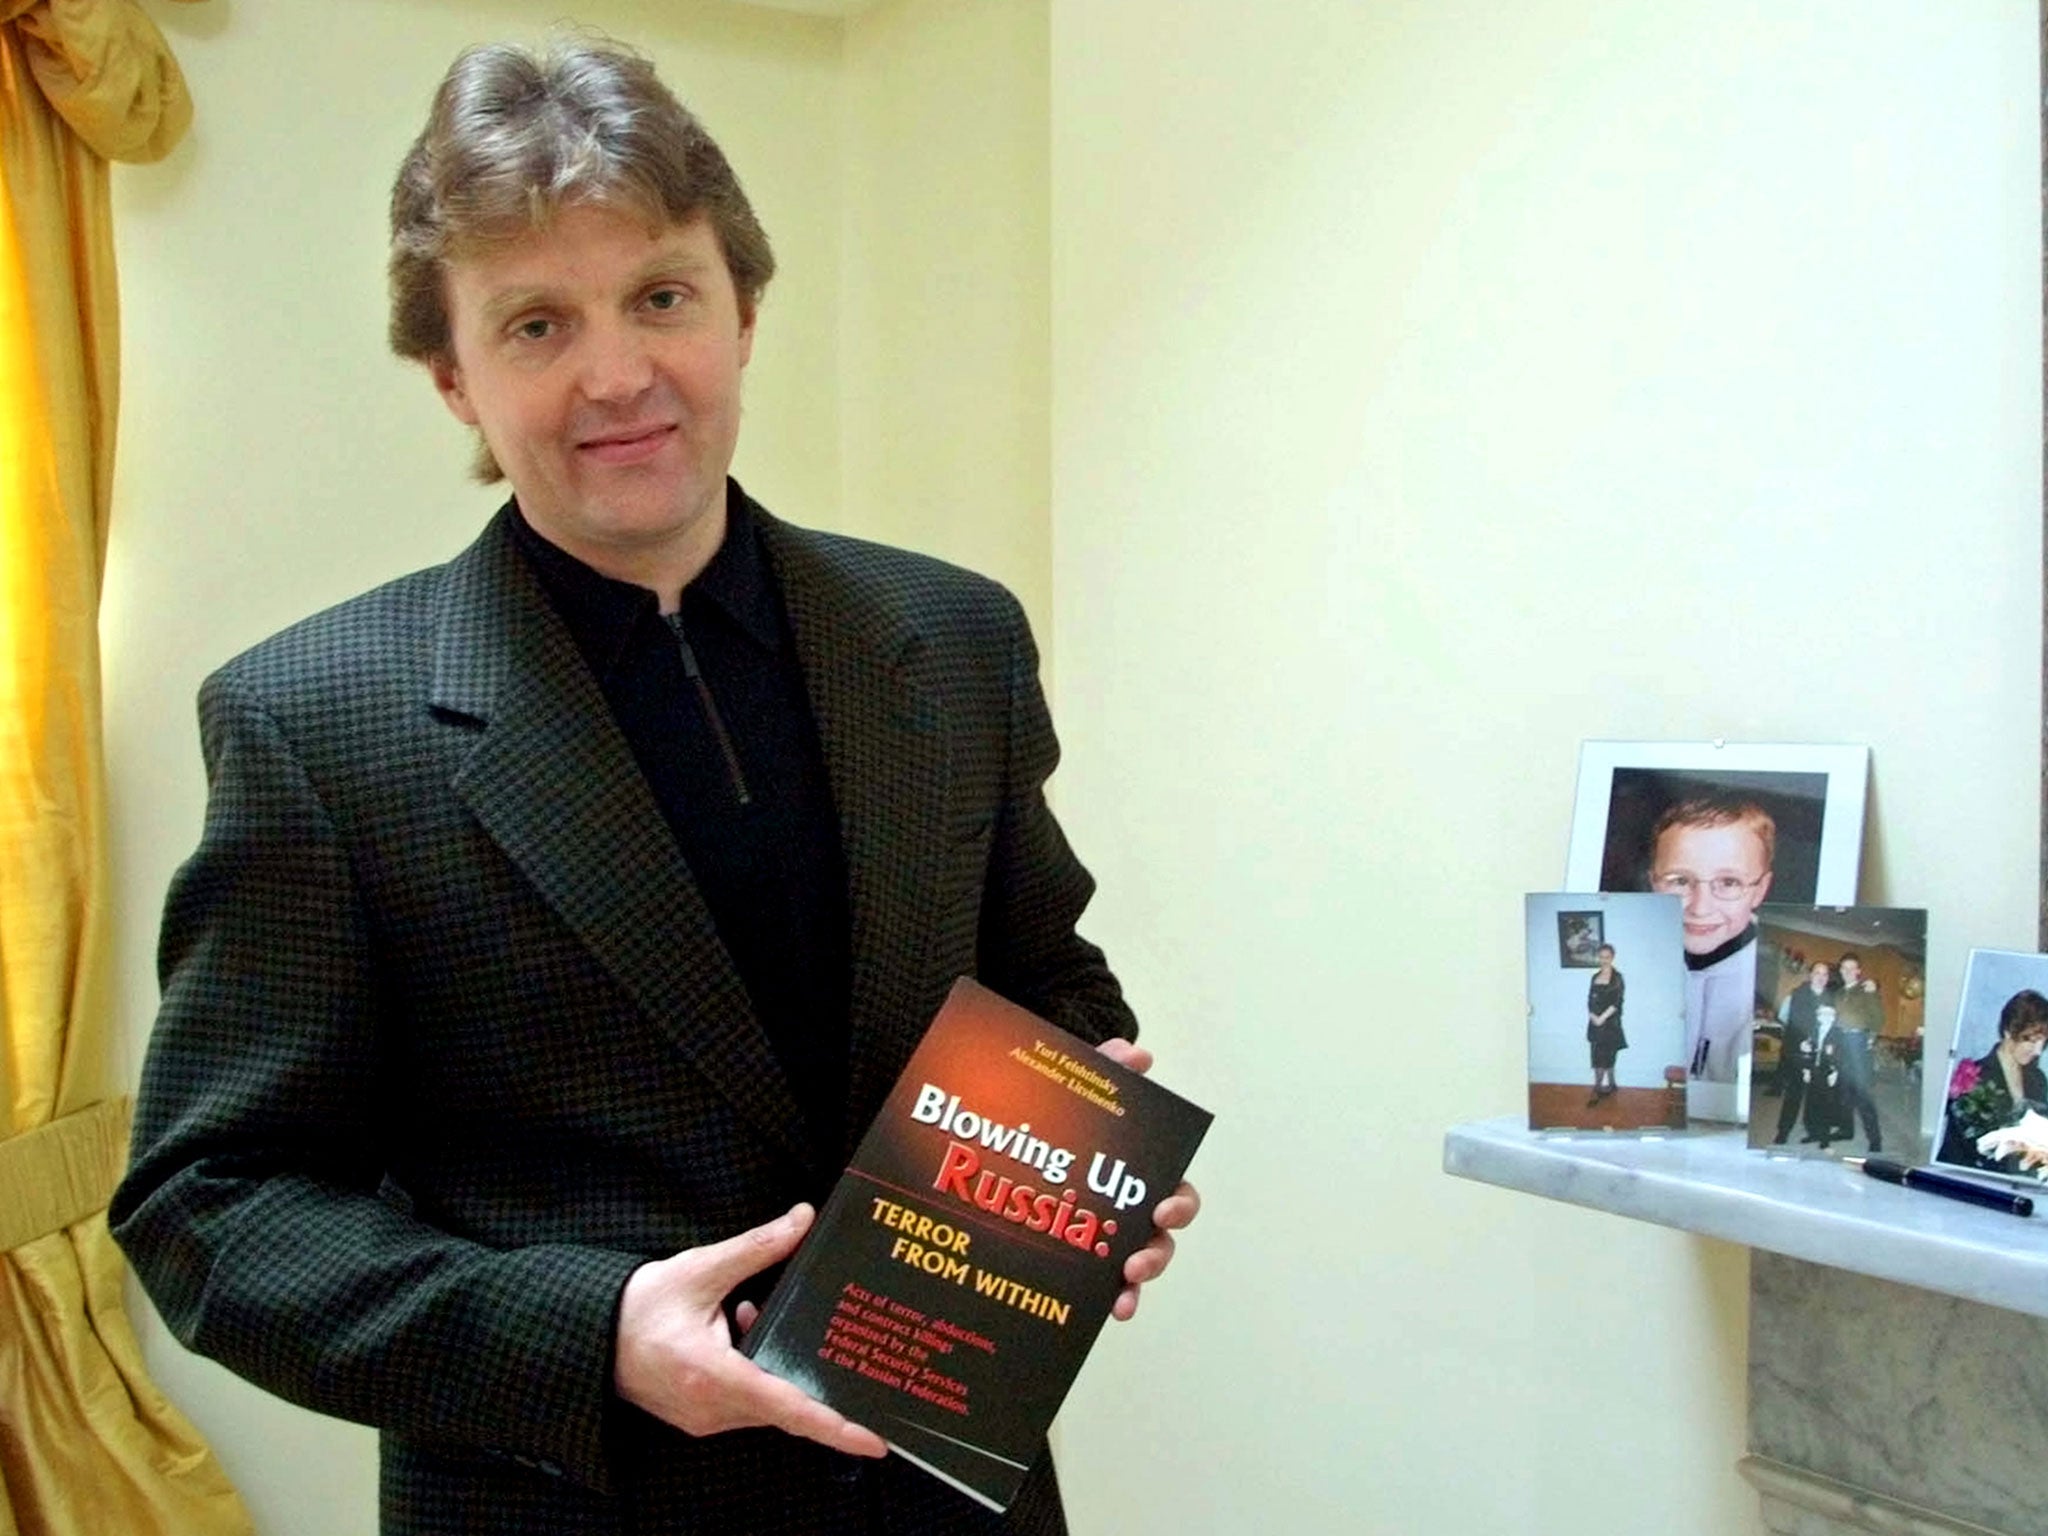 A Friday, 10 May 2002 file photo showing Alexander Litvinenko, former KGB spy and author of the book "Blowing Up Russia: Terror From Within"